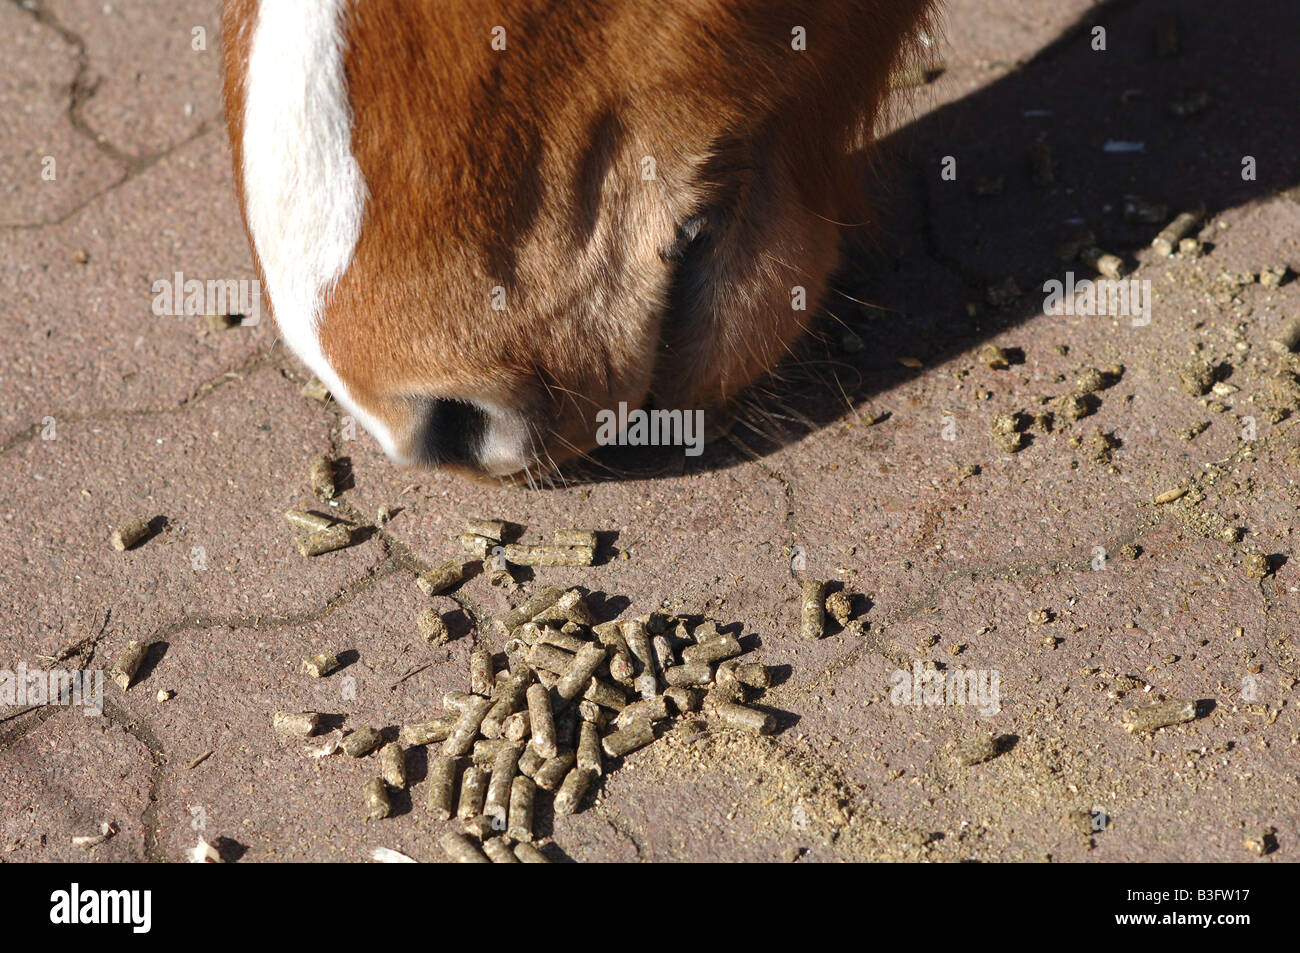 guzzling snout of a horse Stock Photo